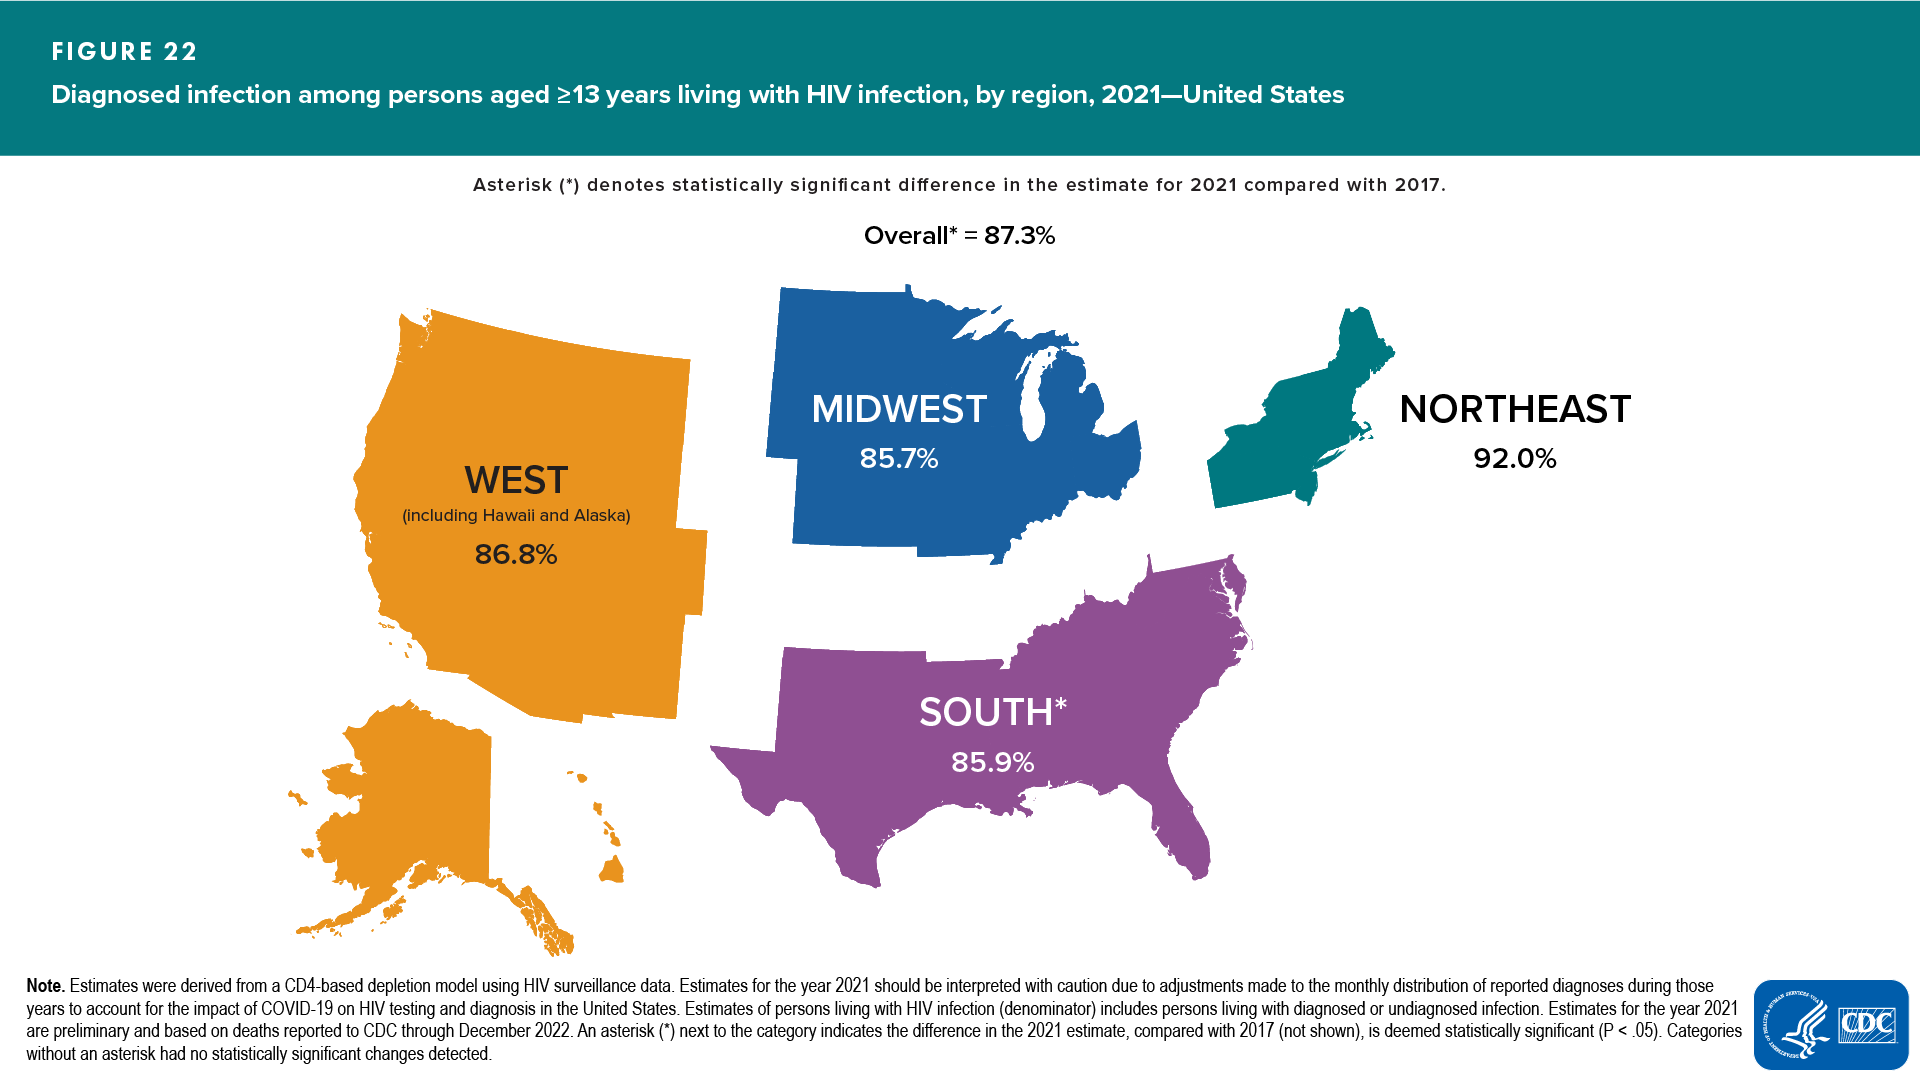 Figure 22. Diagnosed infection among persons aged ≥13 years living with diagnosed or undiagnosed HIV infection, by region, 2021—United States